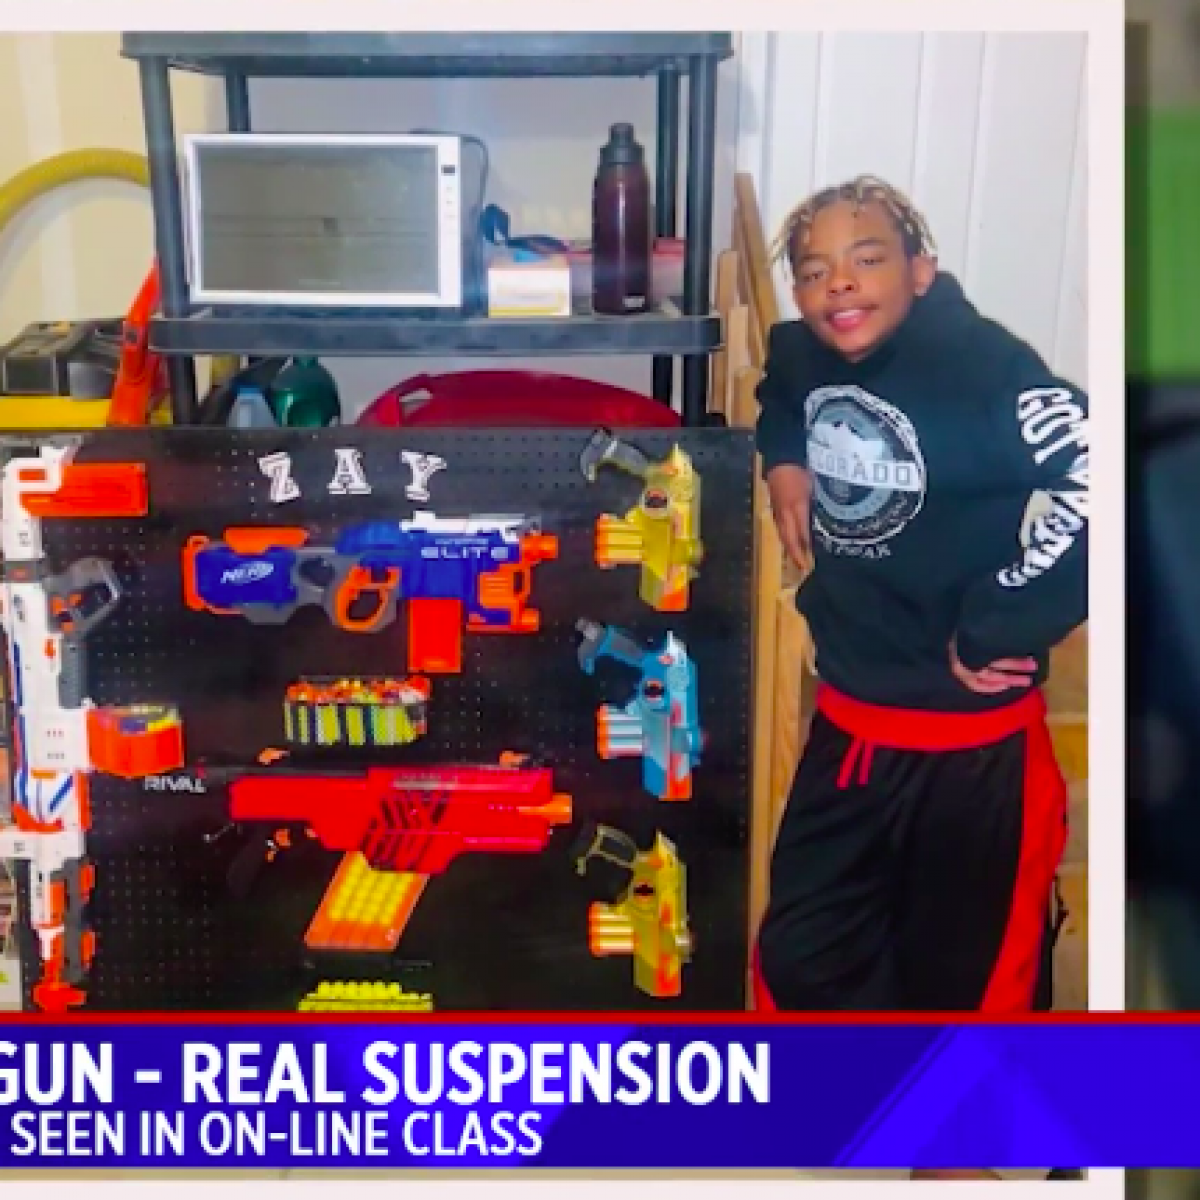 School Called Police On Black 12-Year-Old Playing With Toy Gun During Online Class